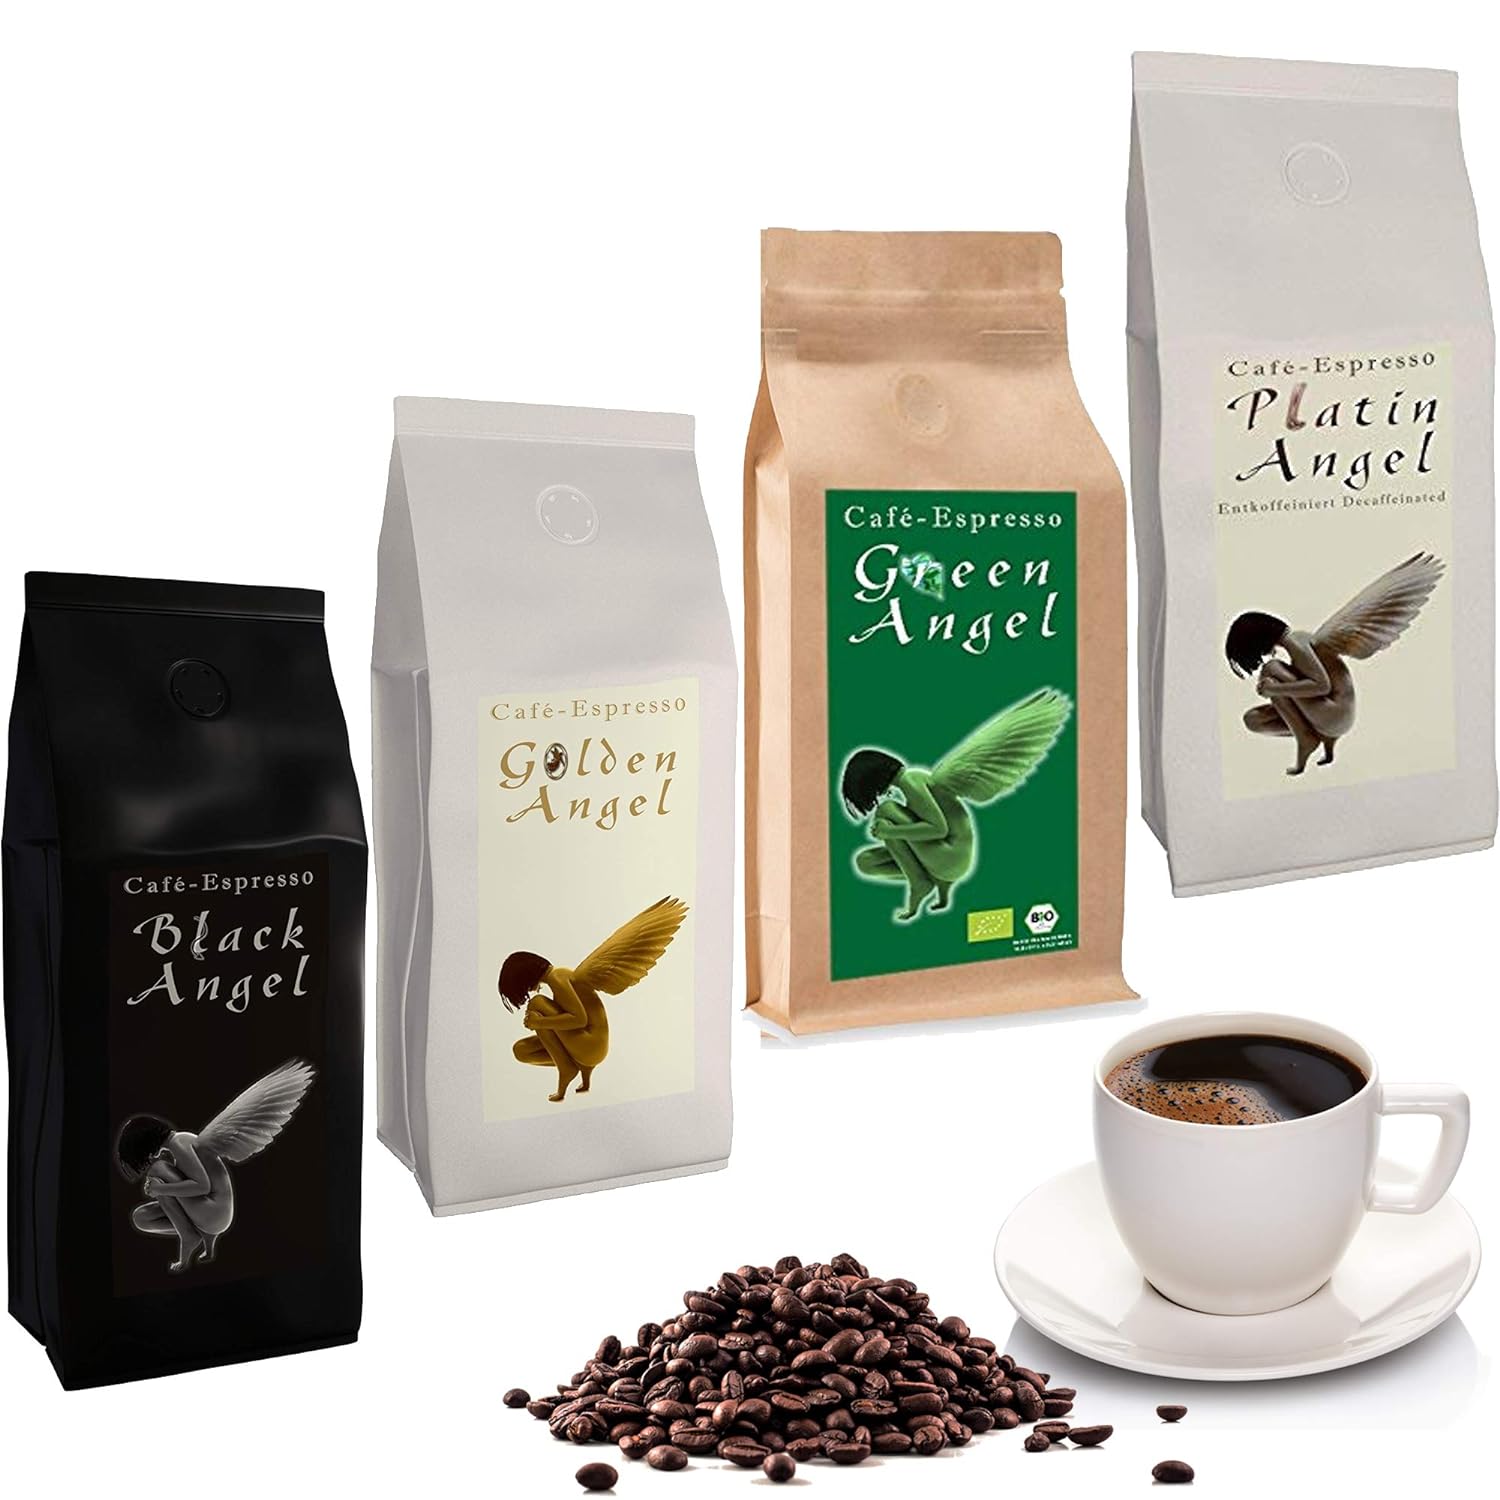 Espresso Sample Package Cafe / Coffee Beans 4 x 150 g Whole Bean \"4 Angels for Crema\"